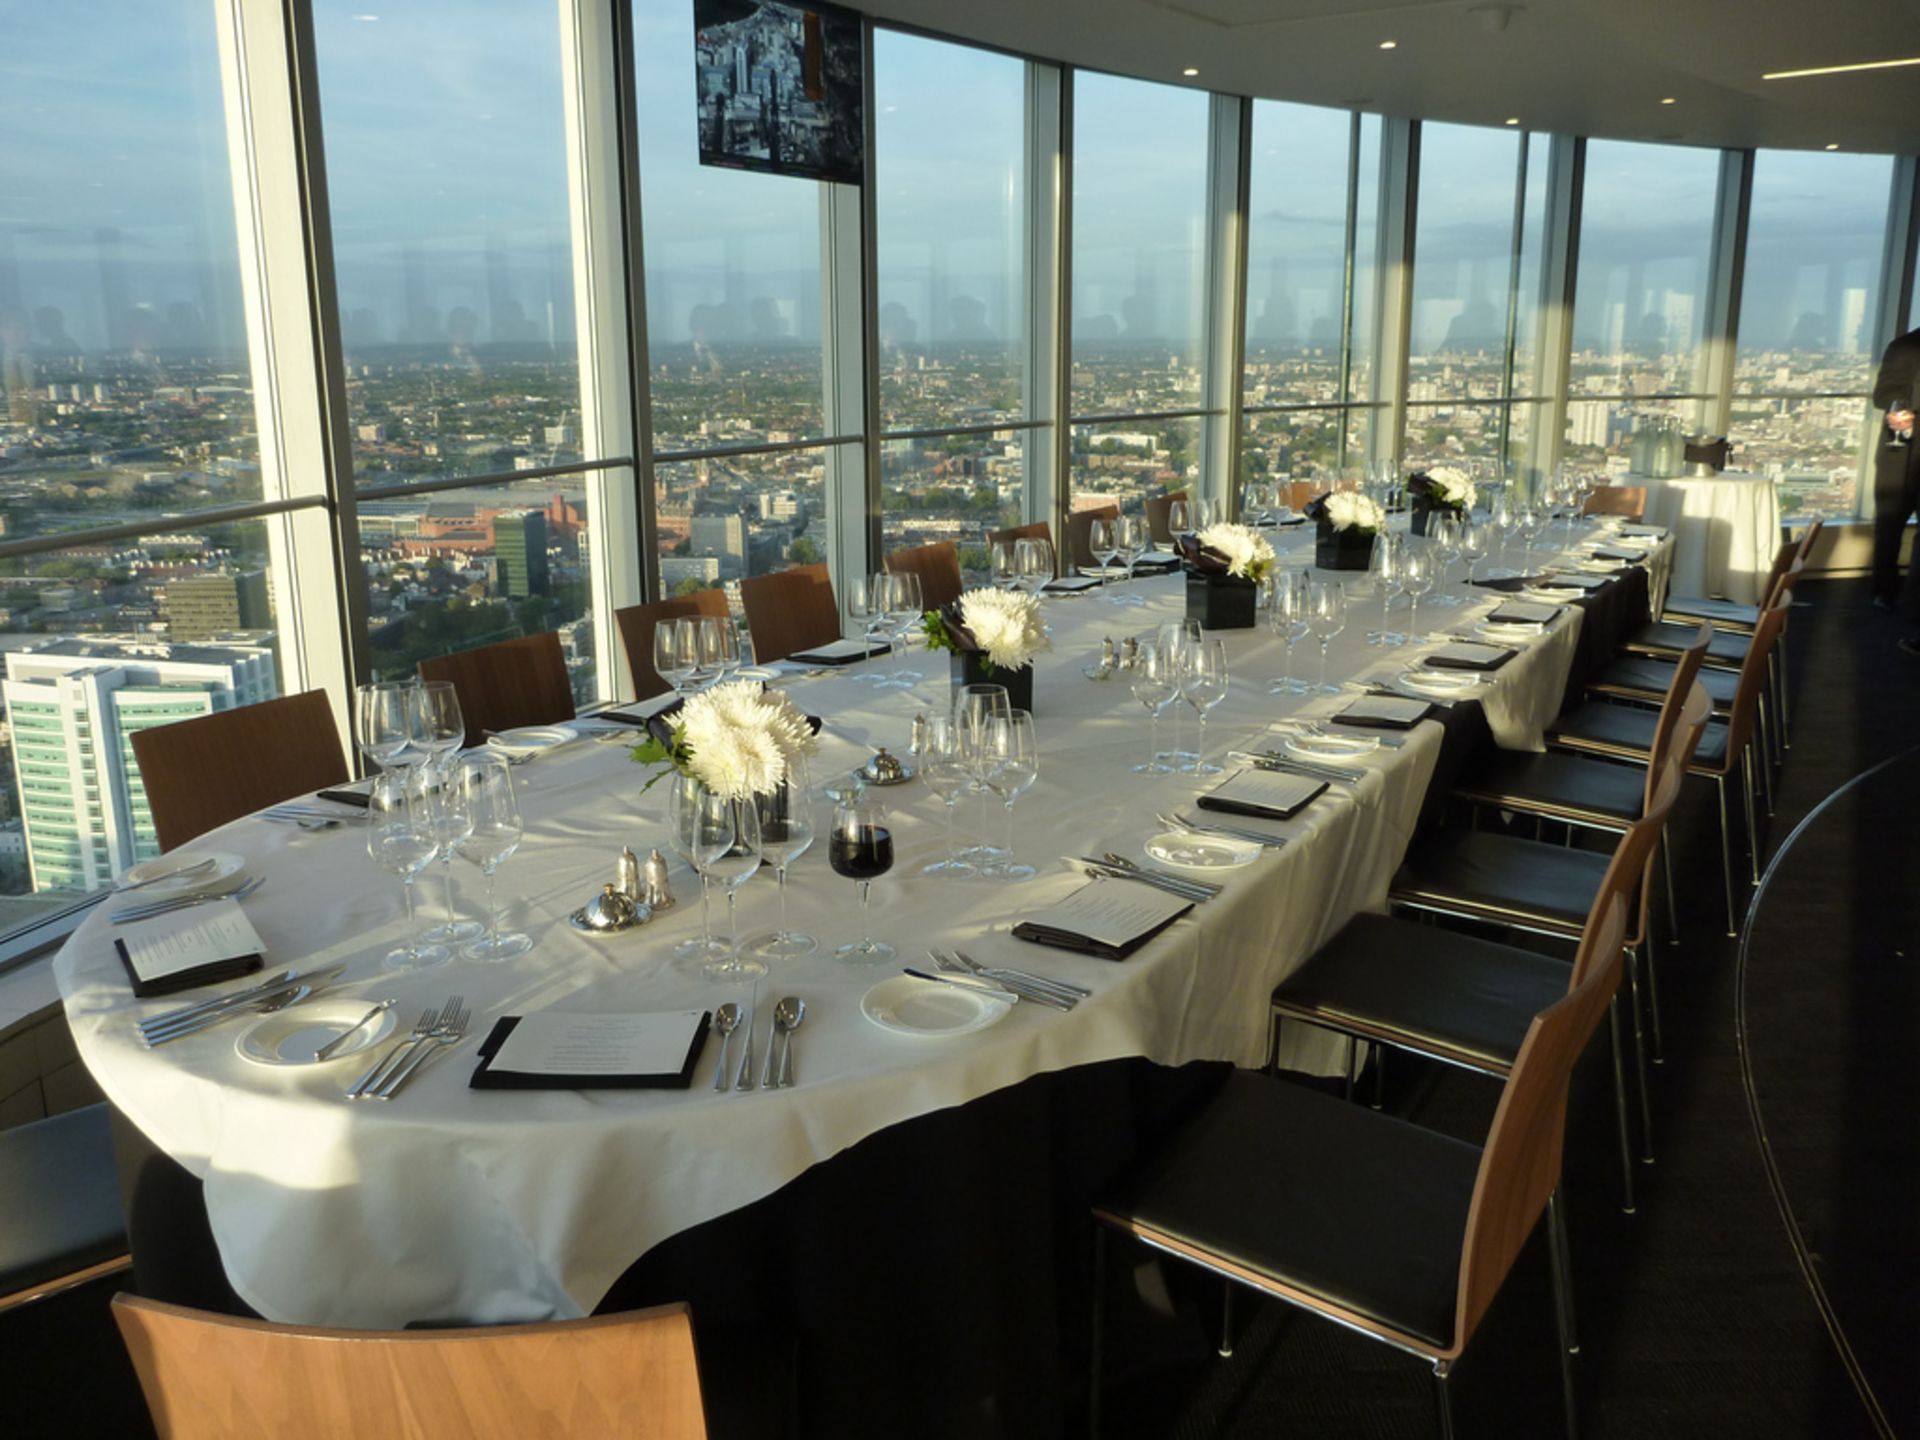 Guests of BT to enjoy a fabulous 'invitation only'  Dinner for 10 at the BT Tower, Dining Club - Image 2 of 4